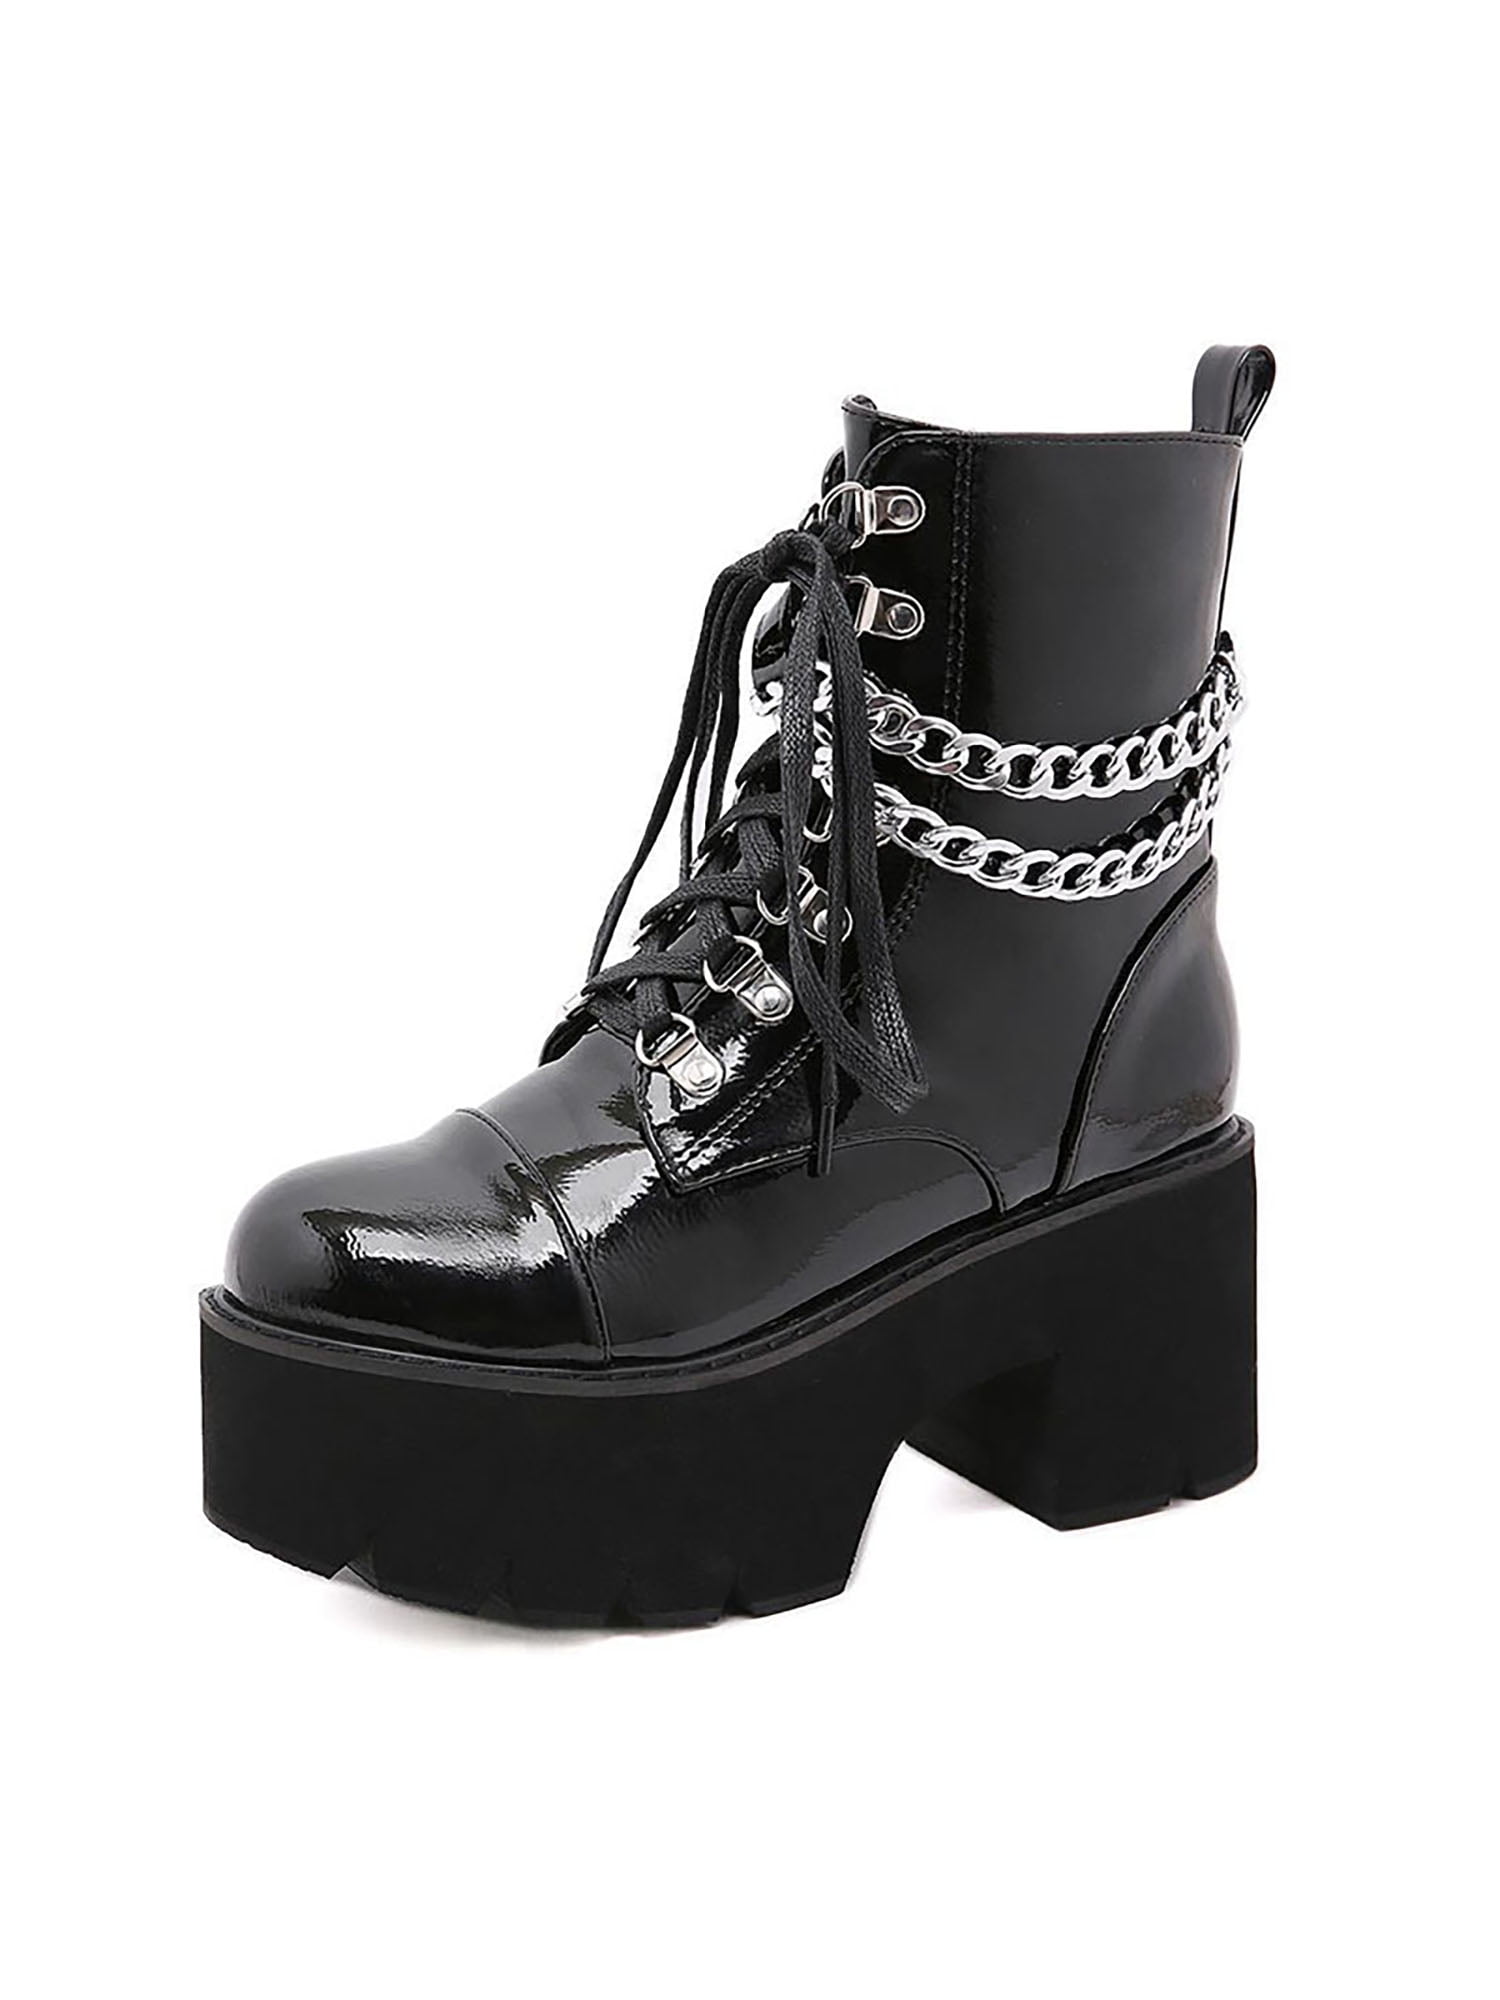 Womens Chunky High Heels Lace Up Round Toe Combat Punk Fashion Ankle Boots Shoes 